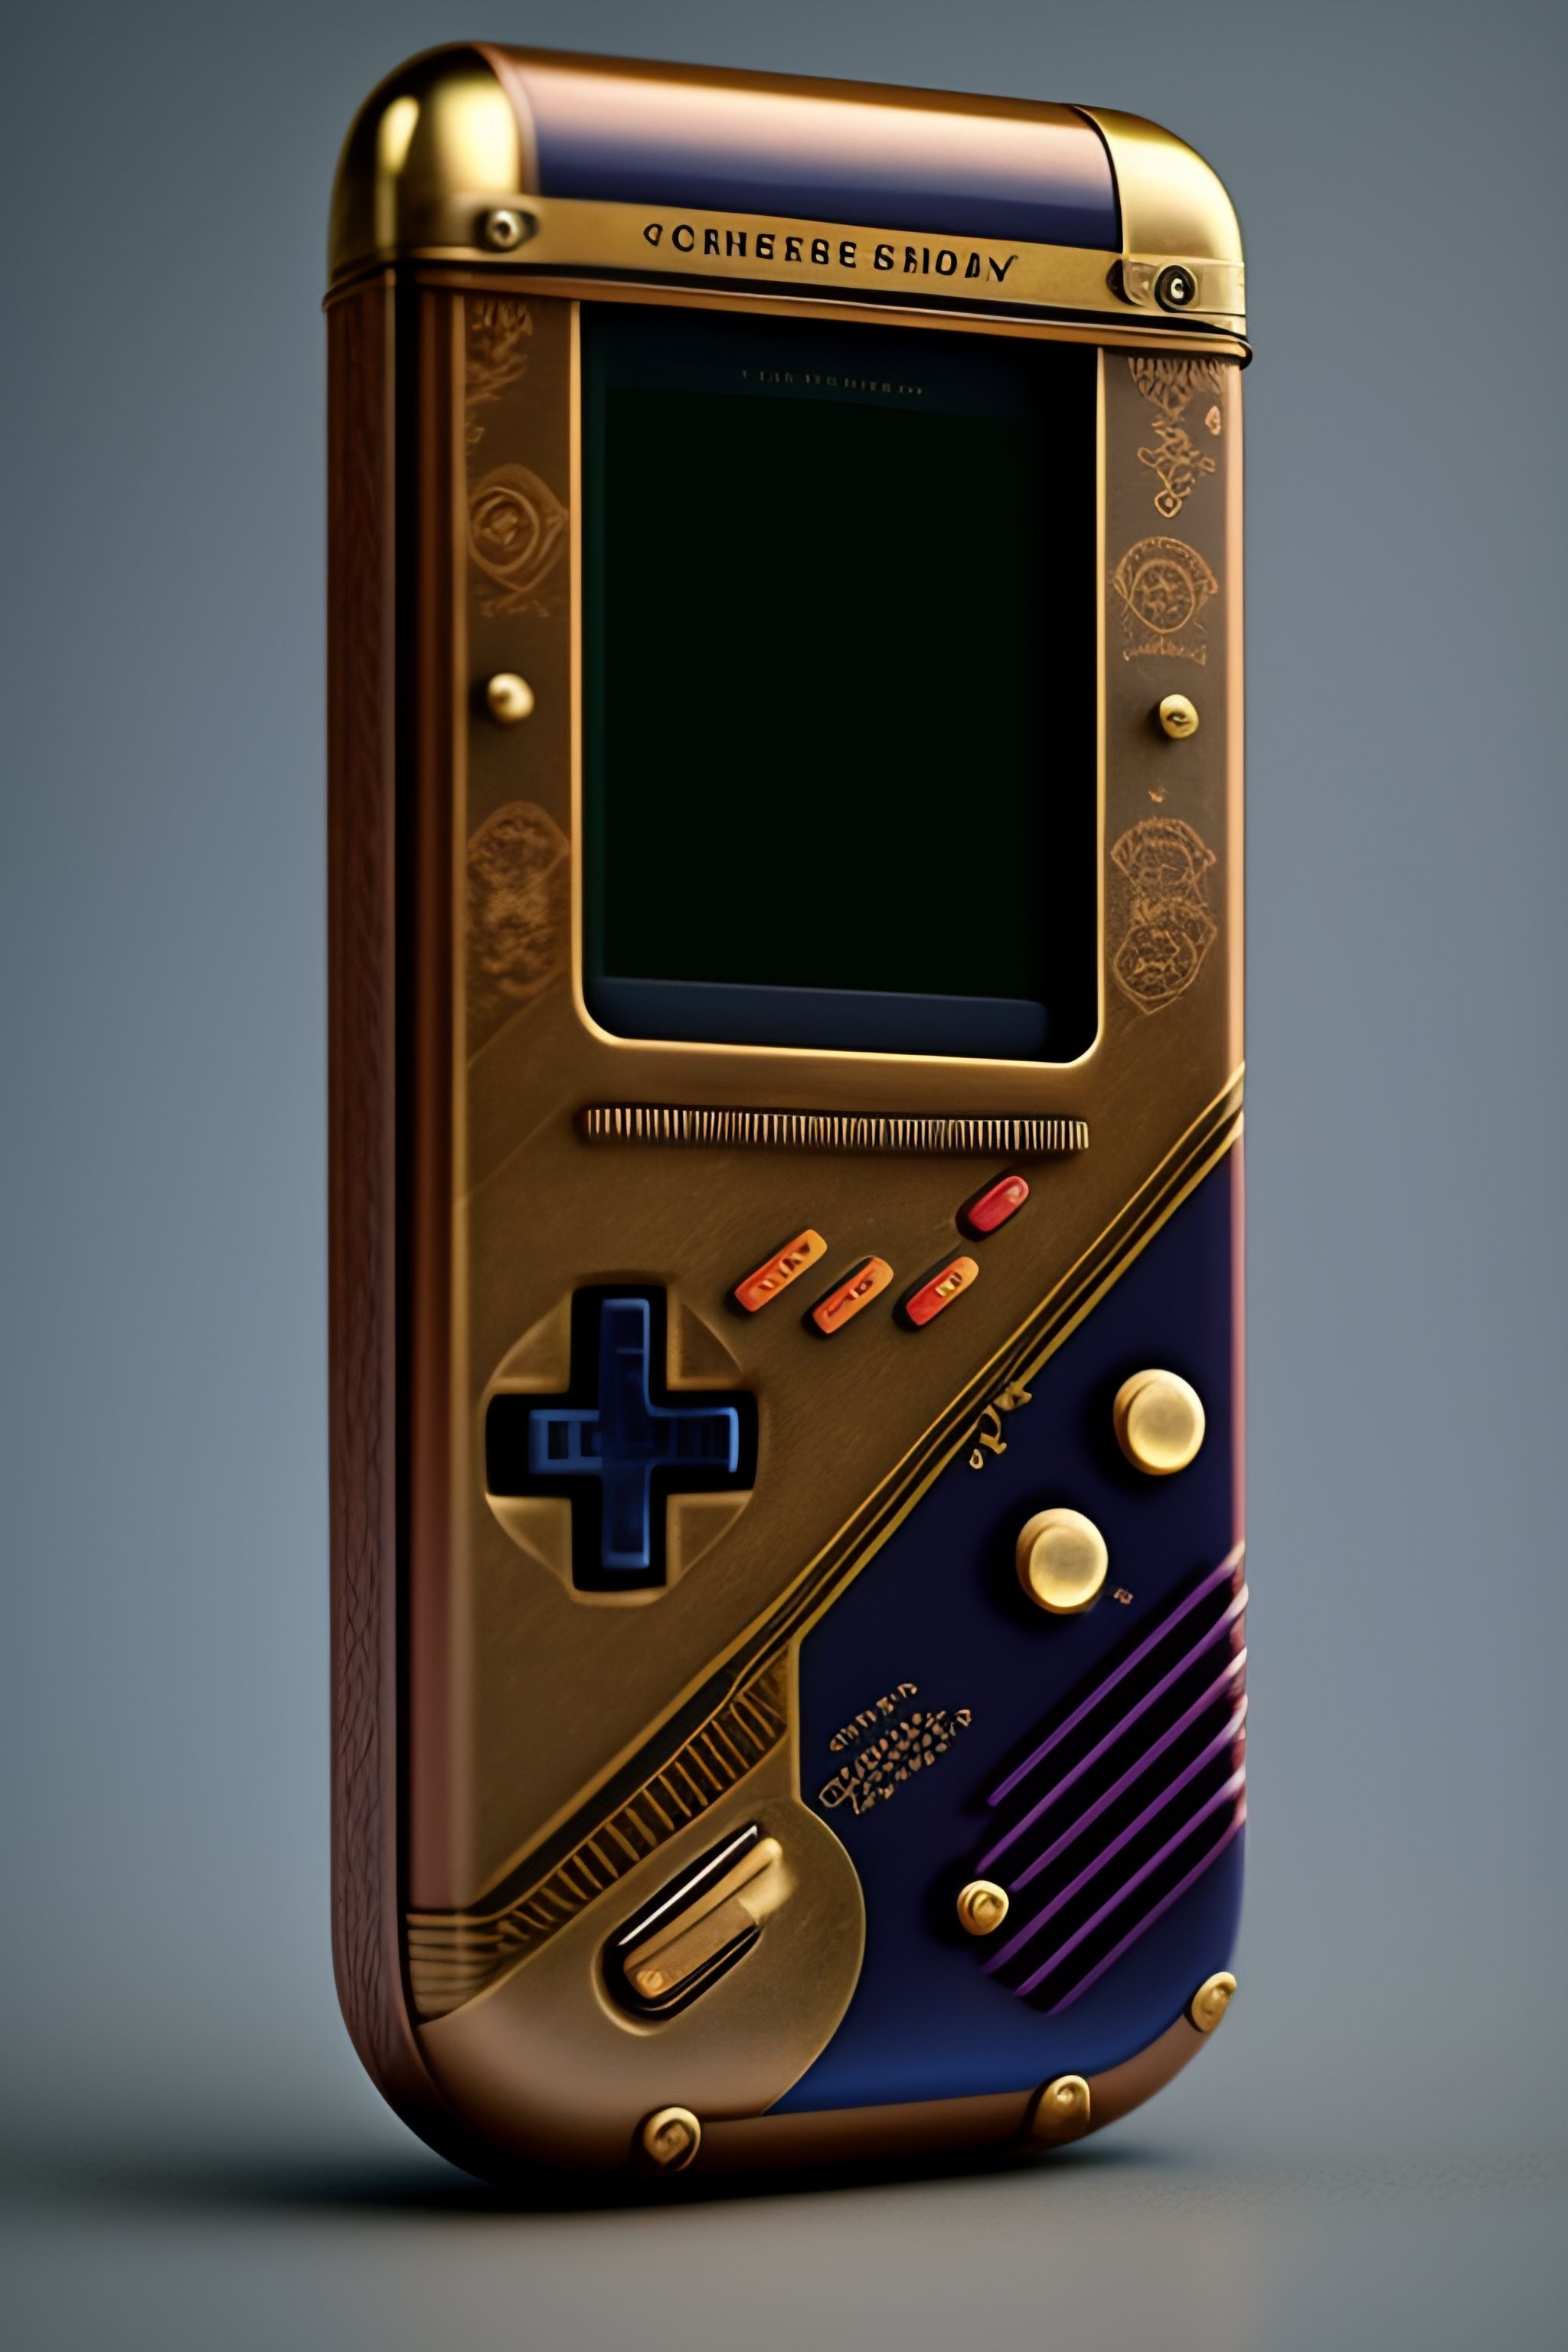 Game Boy Models: The Definitive History